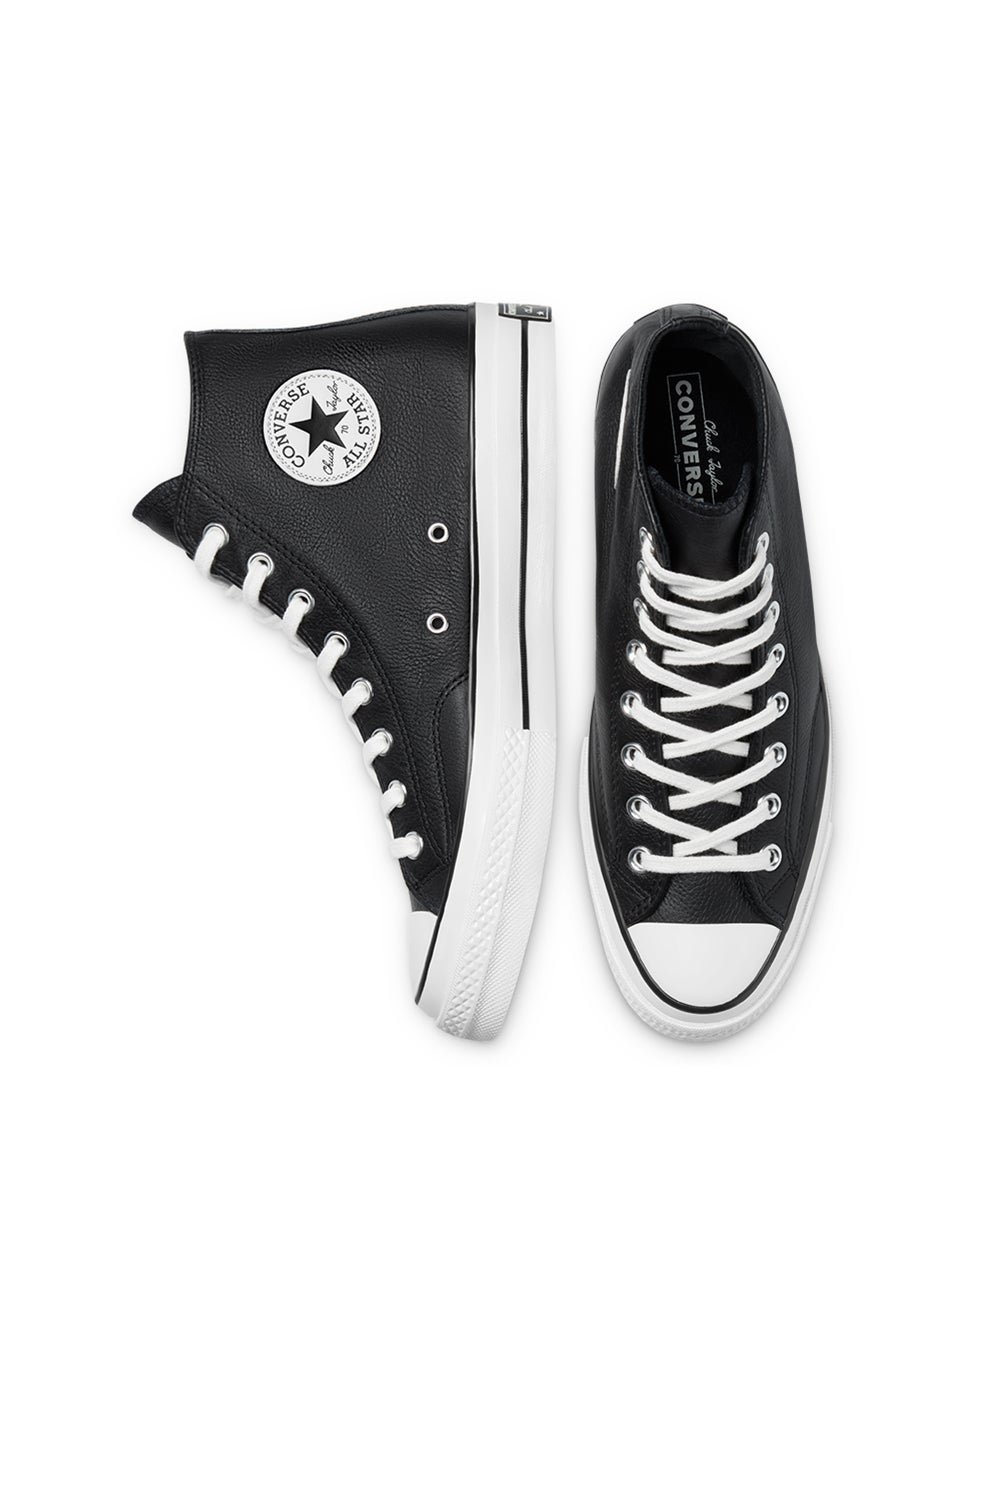 converse 70s leather